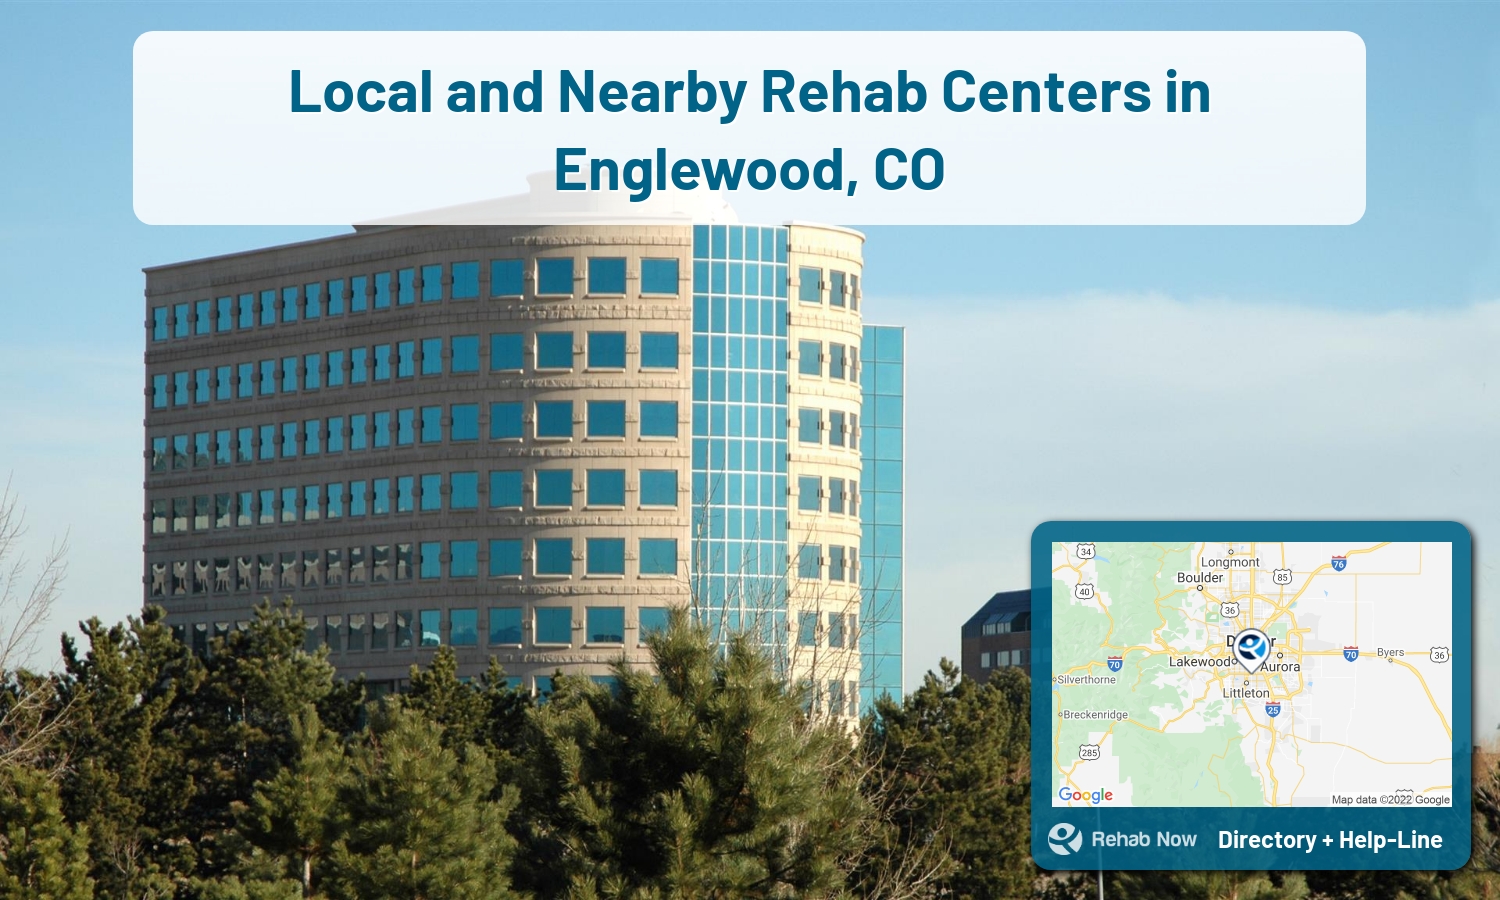 View options, availability, treatment methods, and more, for drug rehab and alcohol treatment in Englewood, Colorado